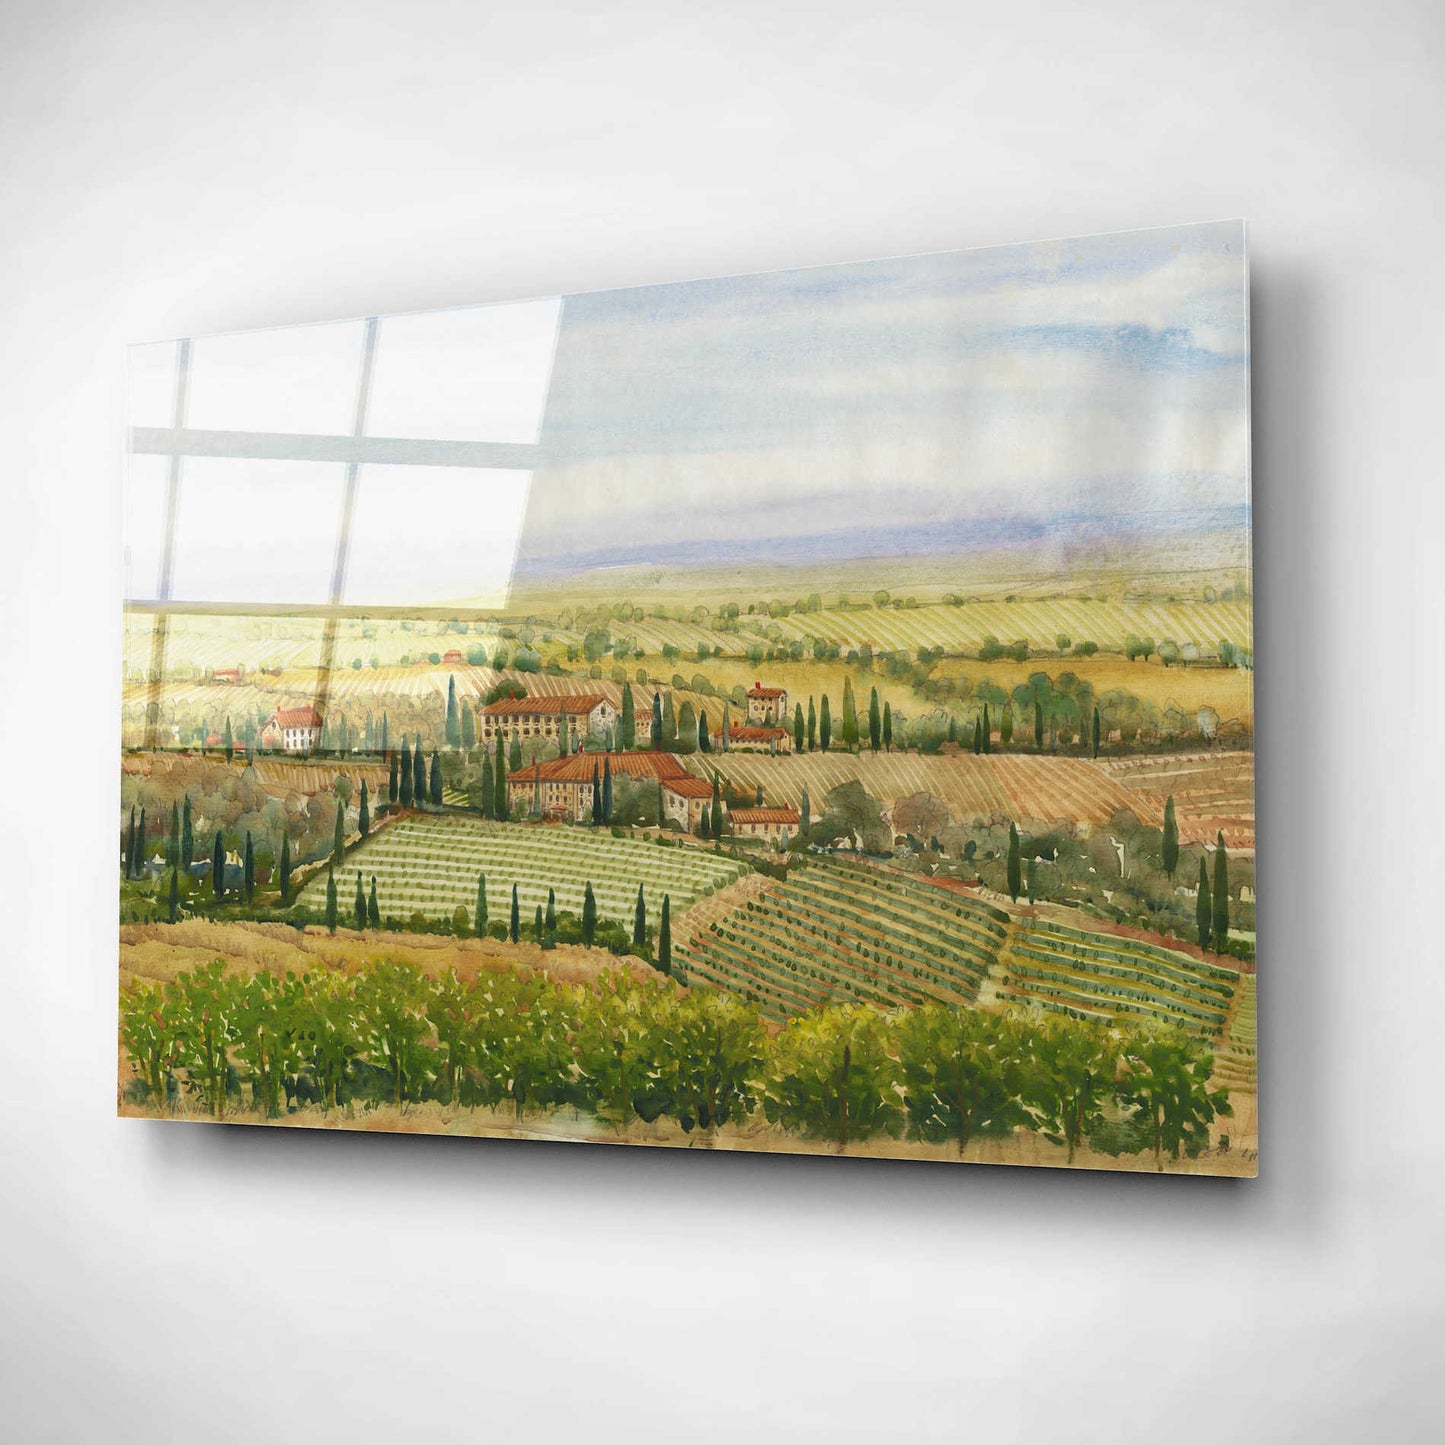 Epic Art 'Wine Country View II' by Tim O'Toole, Acrylic Glass Wall Art,16x12